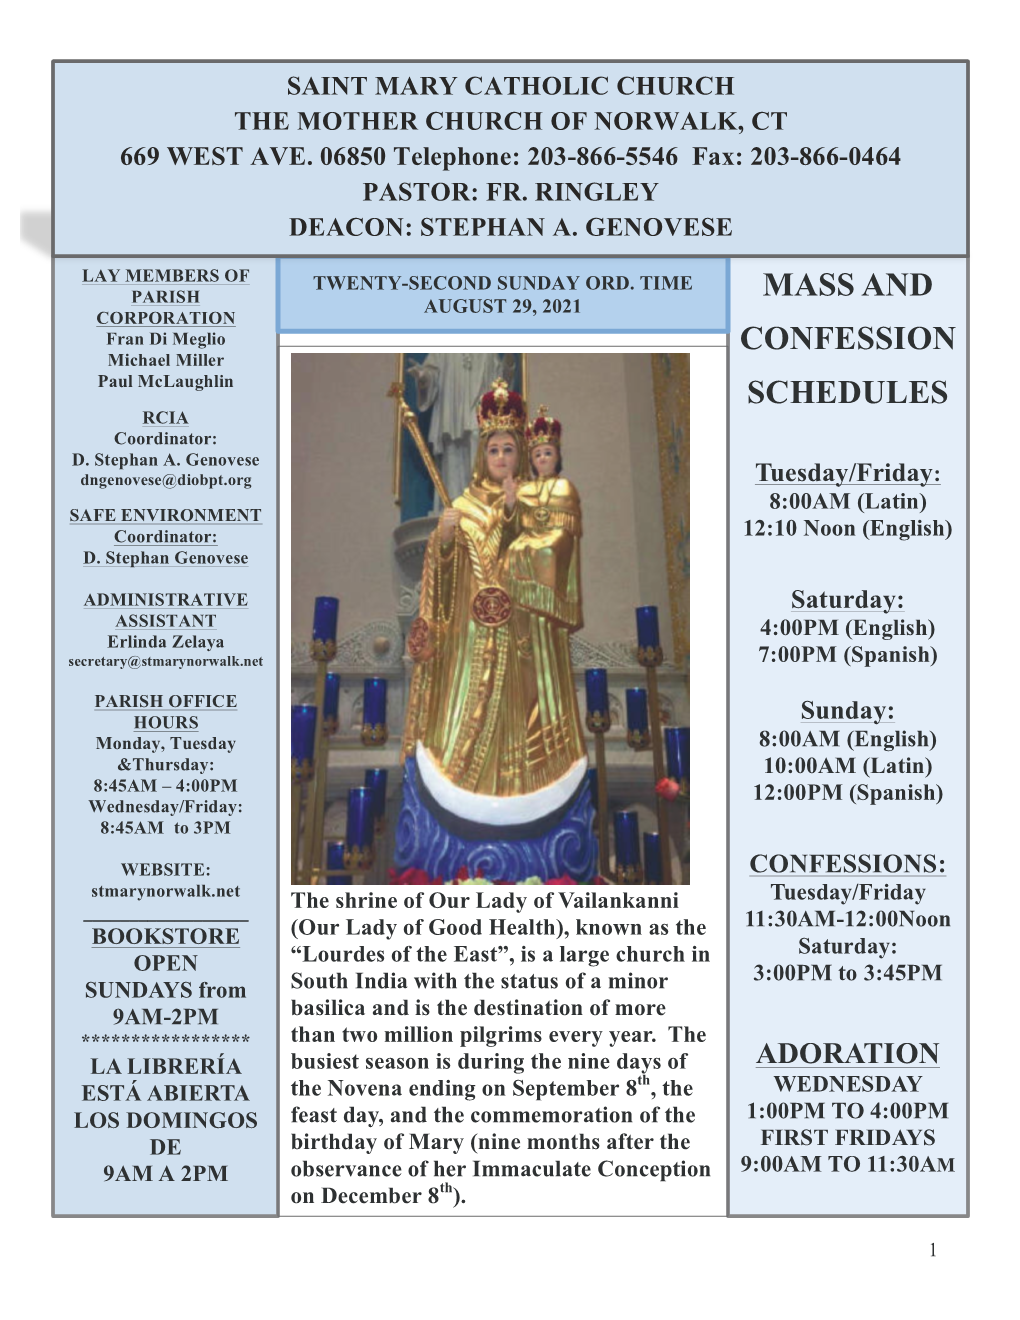 Mass and Confession Schedules